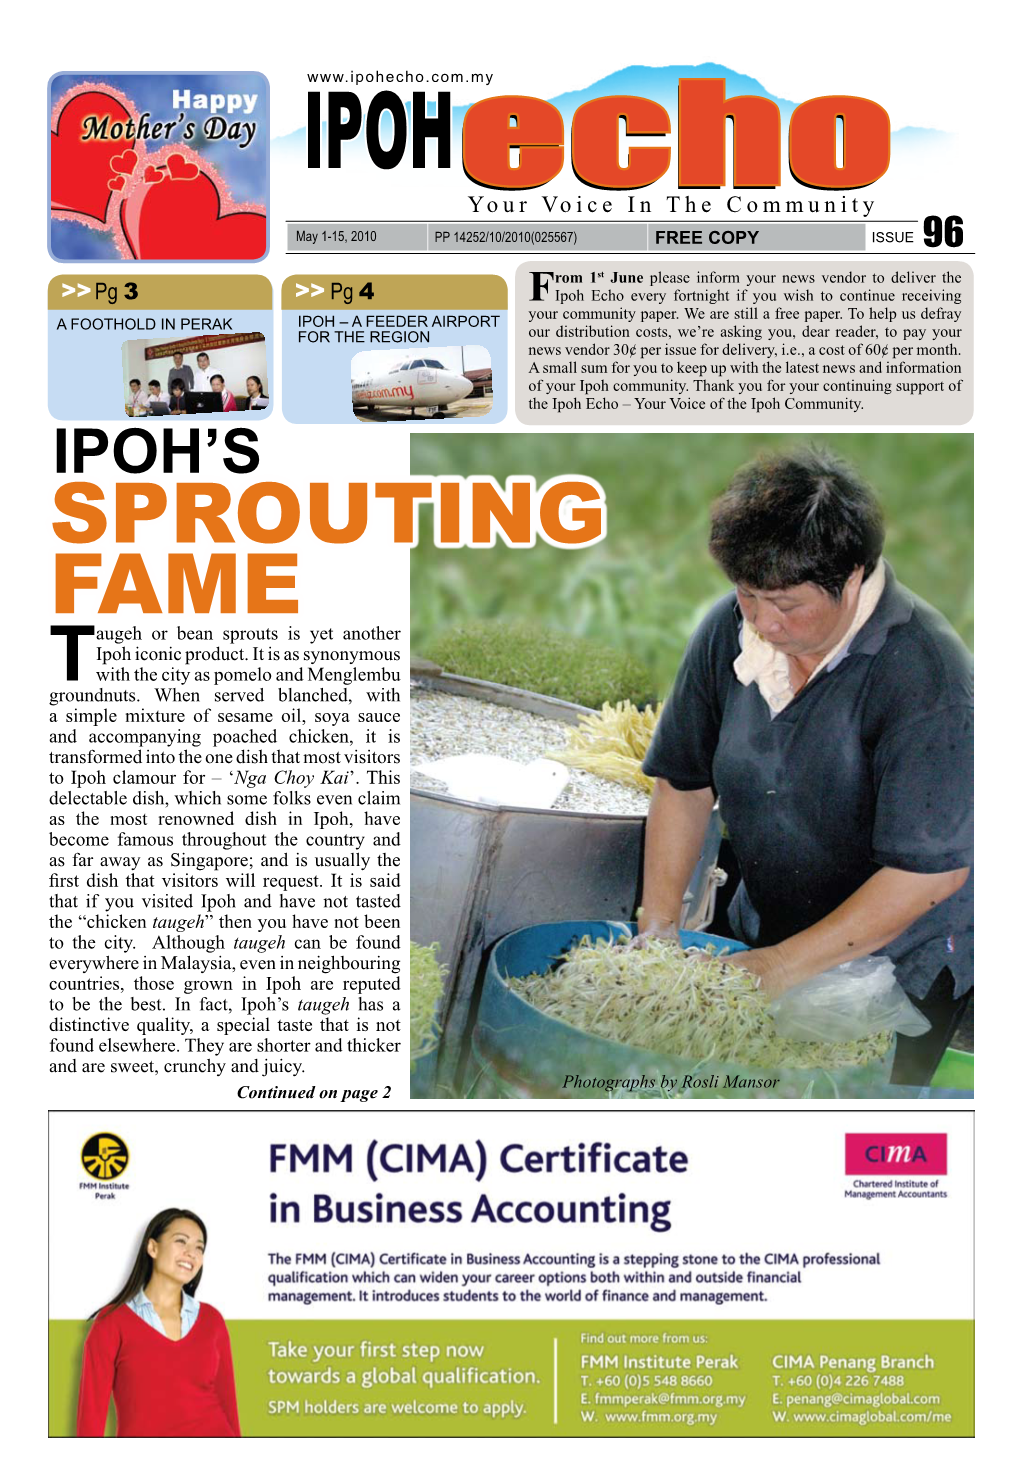 SPROUTING FAME Augeh Or Bean Sprouts Is Yet Another Ipoh Iconic Product